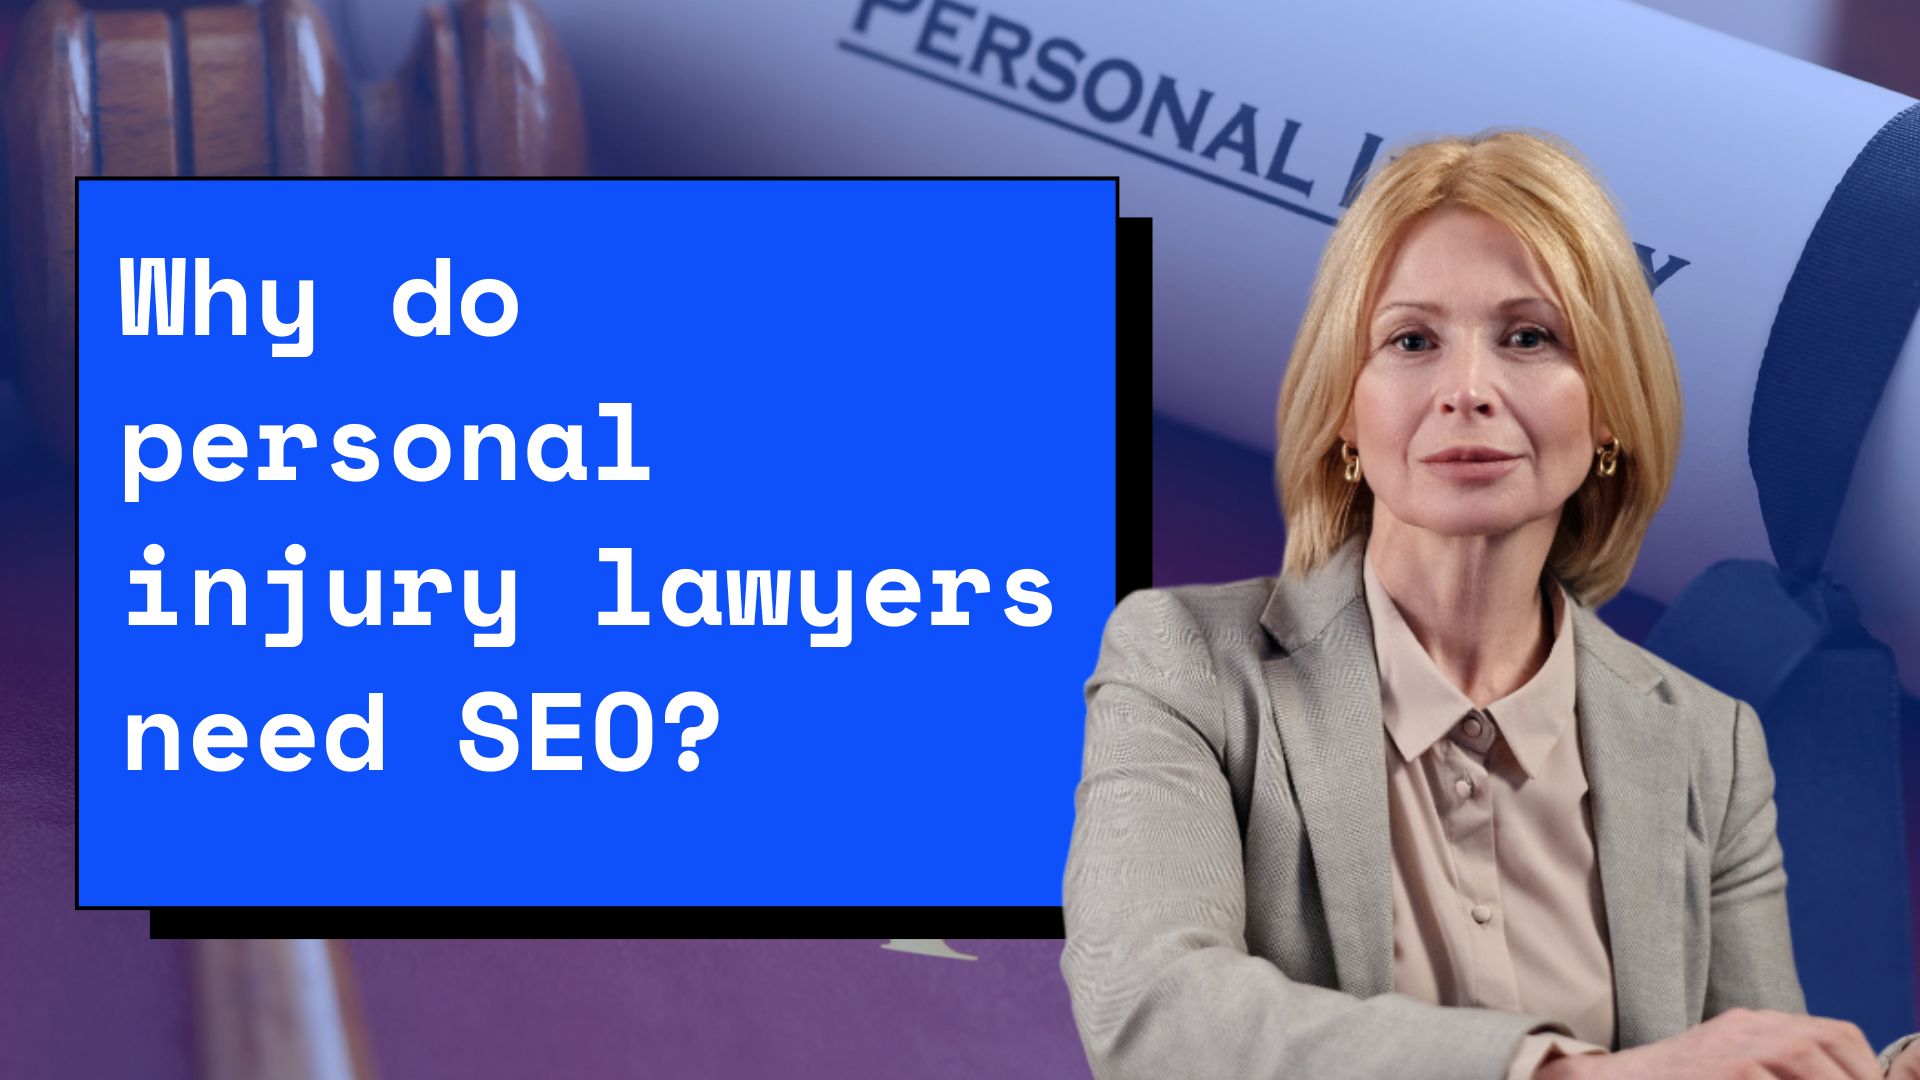 Why do personal injury lawyers need SEO